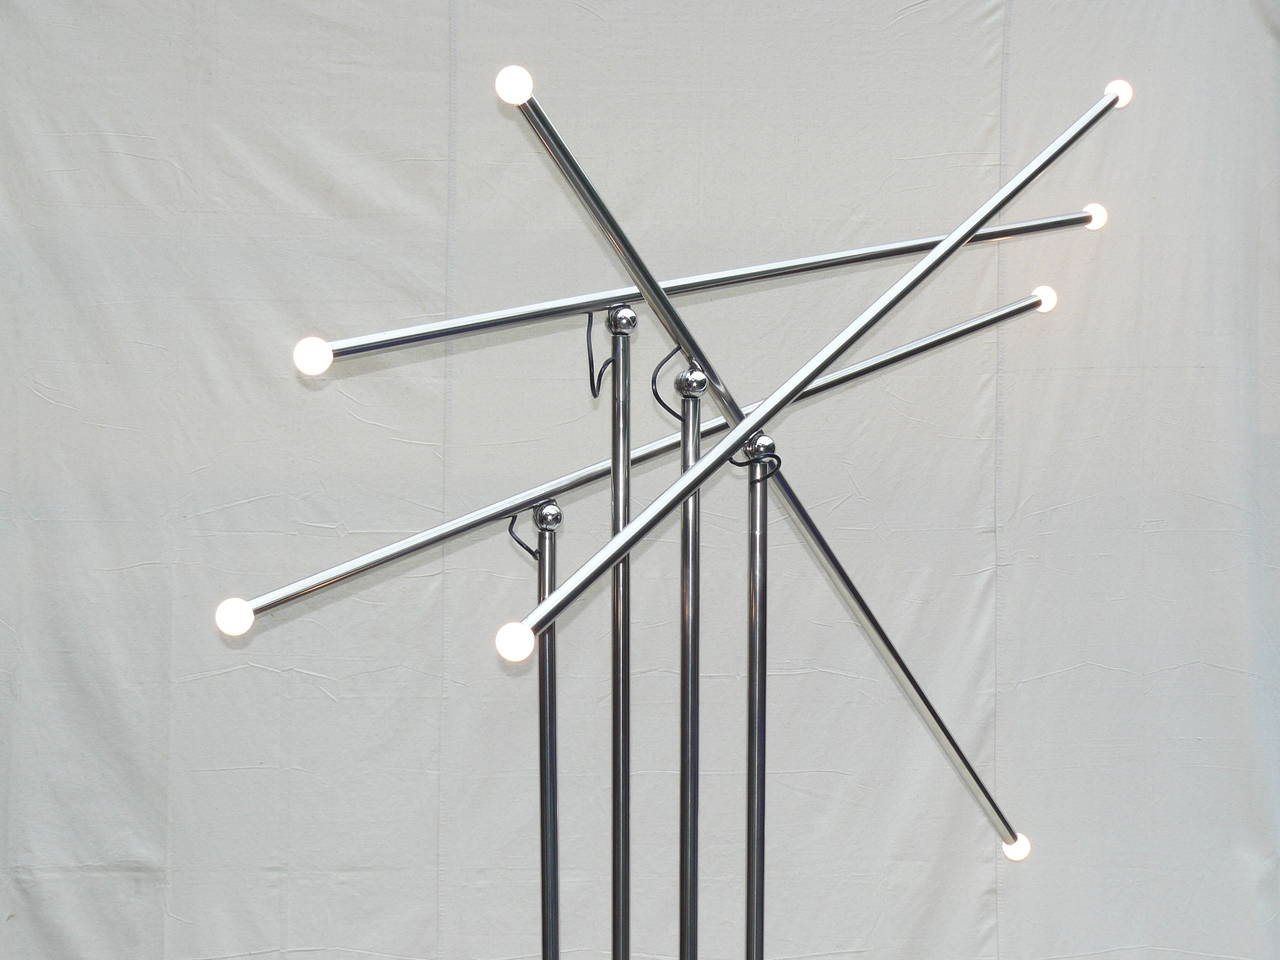 Rare 1960s Arteluce Giraffe floor lamp. Large-scale monumental floor lamp comprised of four articulated swiveling arms that have a bulb on the end of each arm. Dual floor switches control the bulb on one end of the arms. A very nice early example of